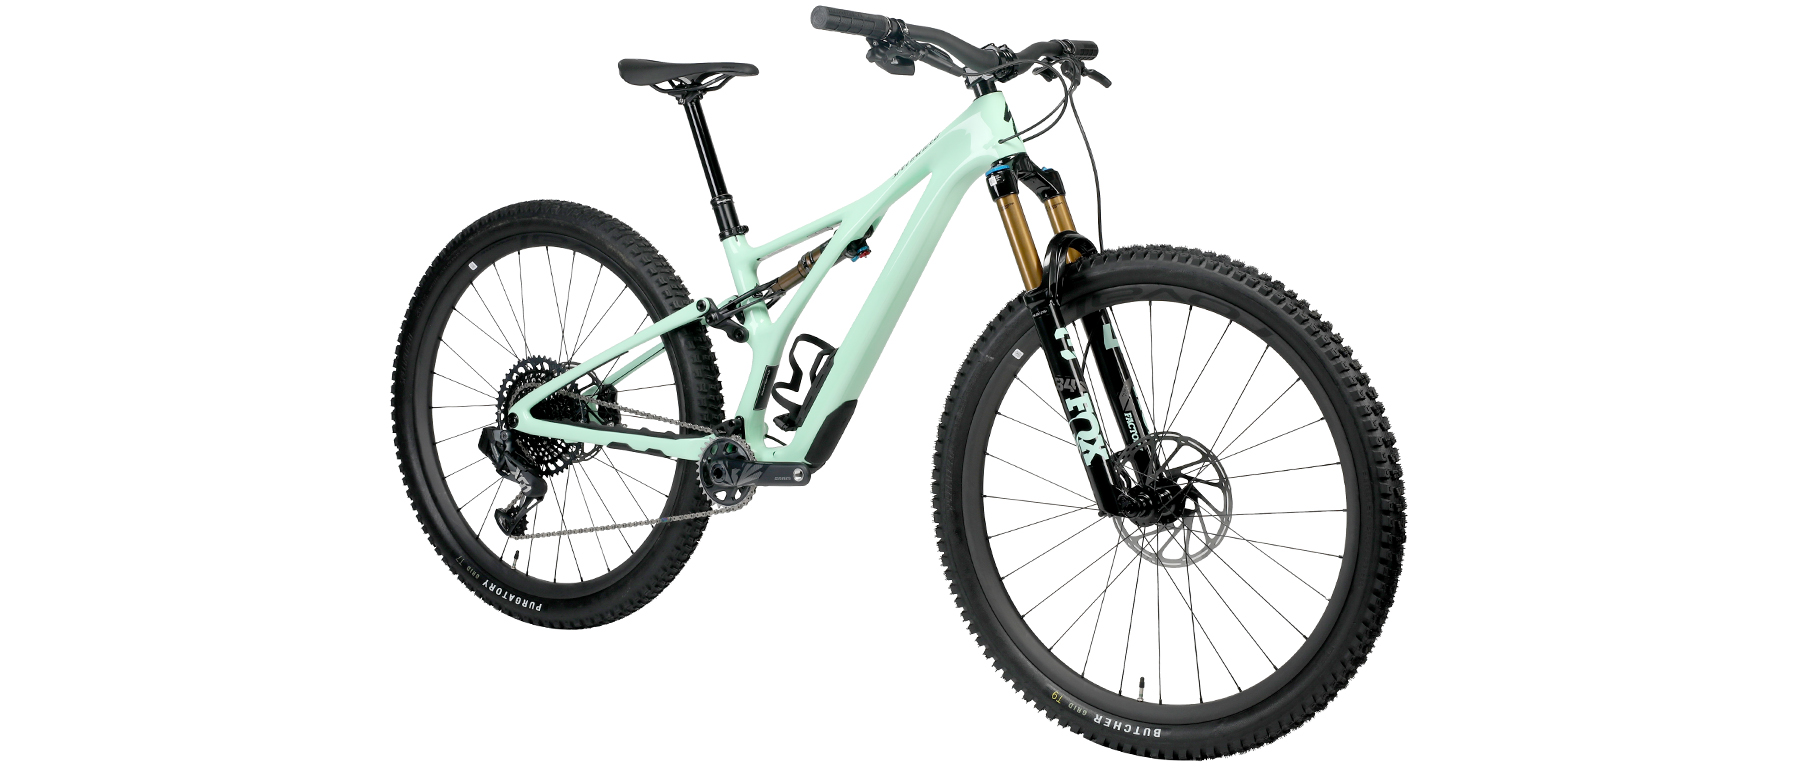 Specialized Stumpjumper Pro Bicycle 2022